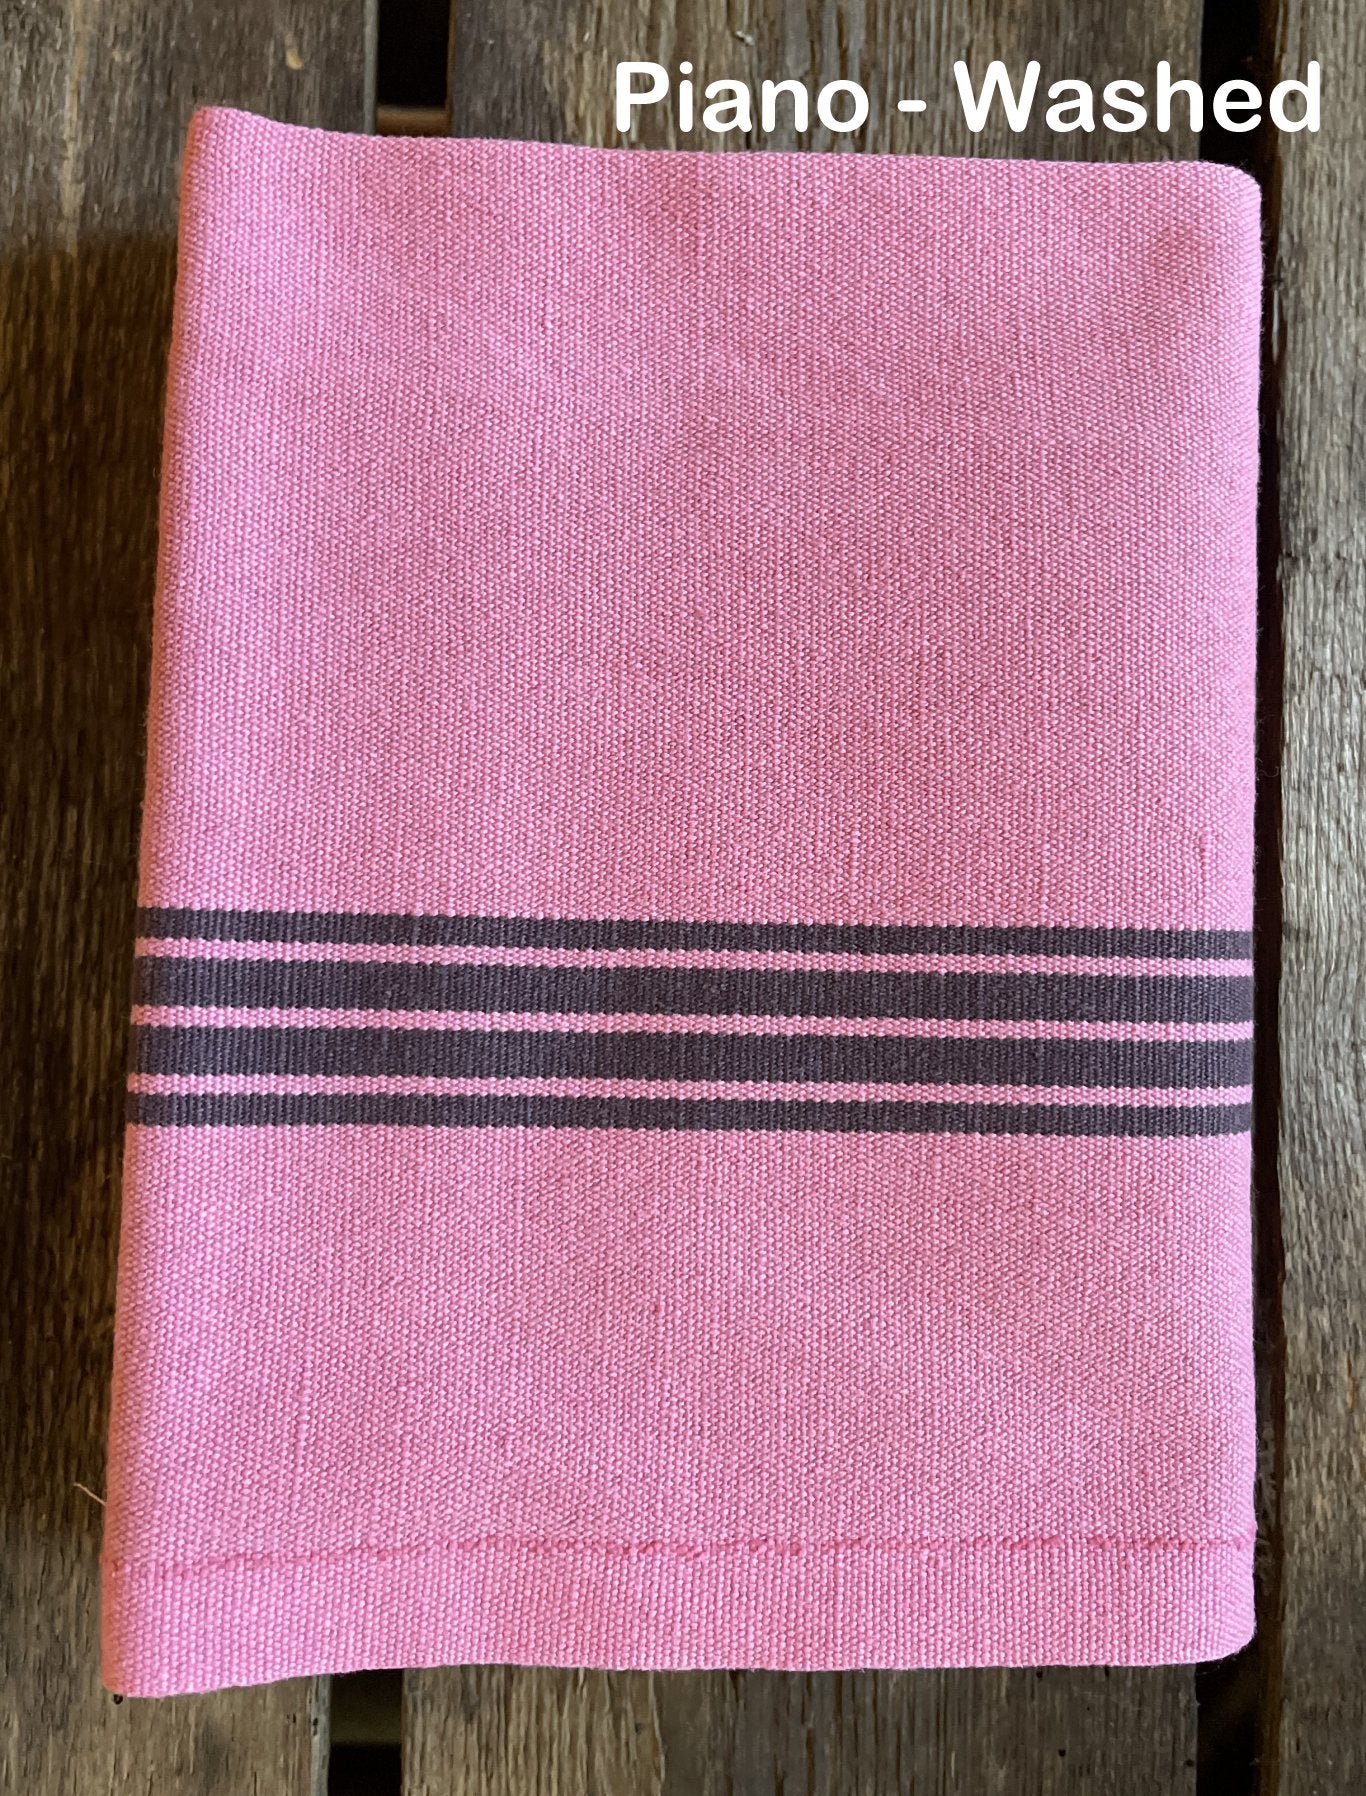 Charvet Editions "Piano" (Pink),  Washed, woven linen union tea towel. Made in France.